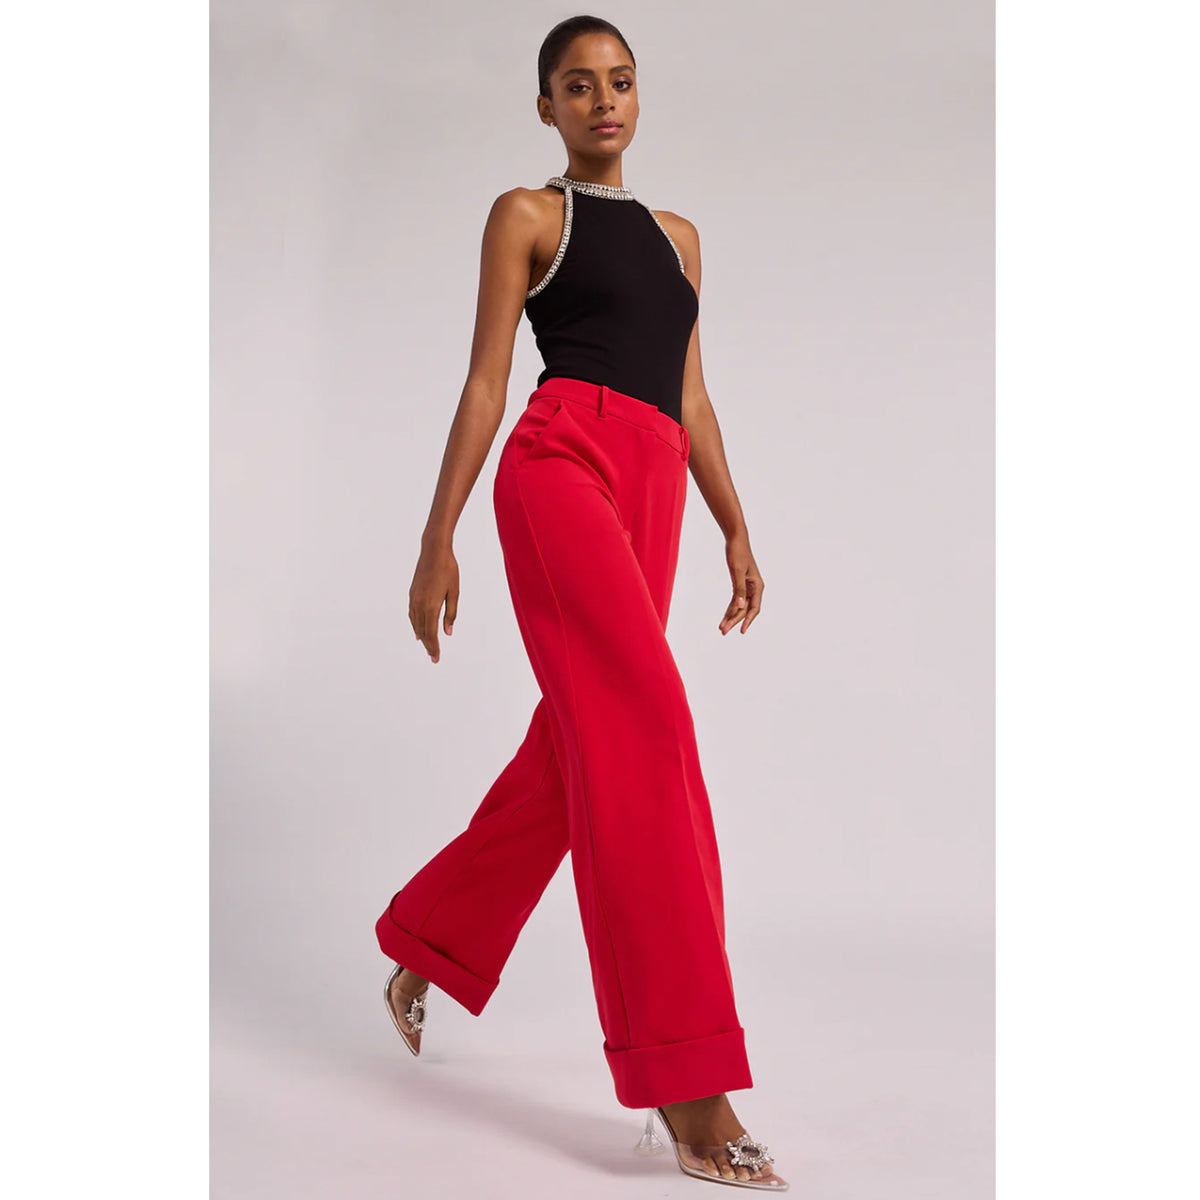 Generation Love Mavis High Waisted Pant in Rouge